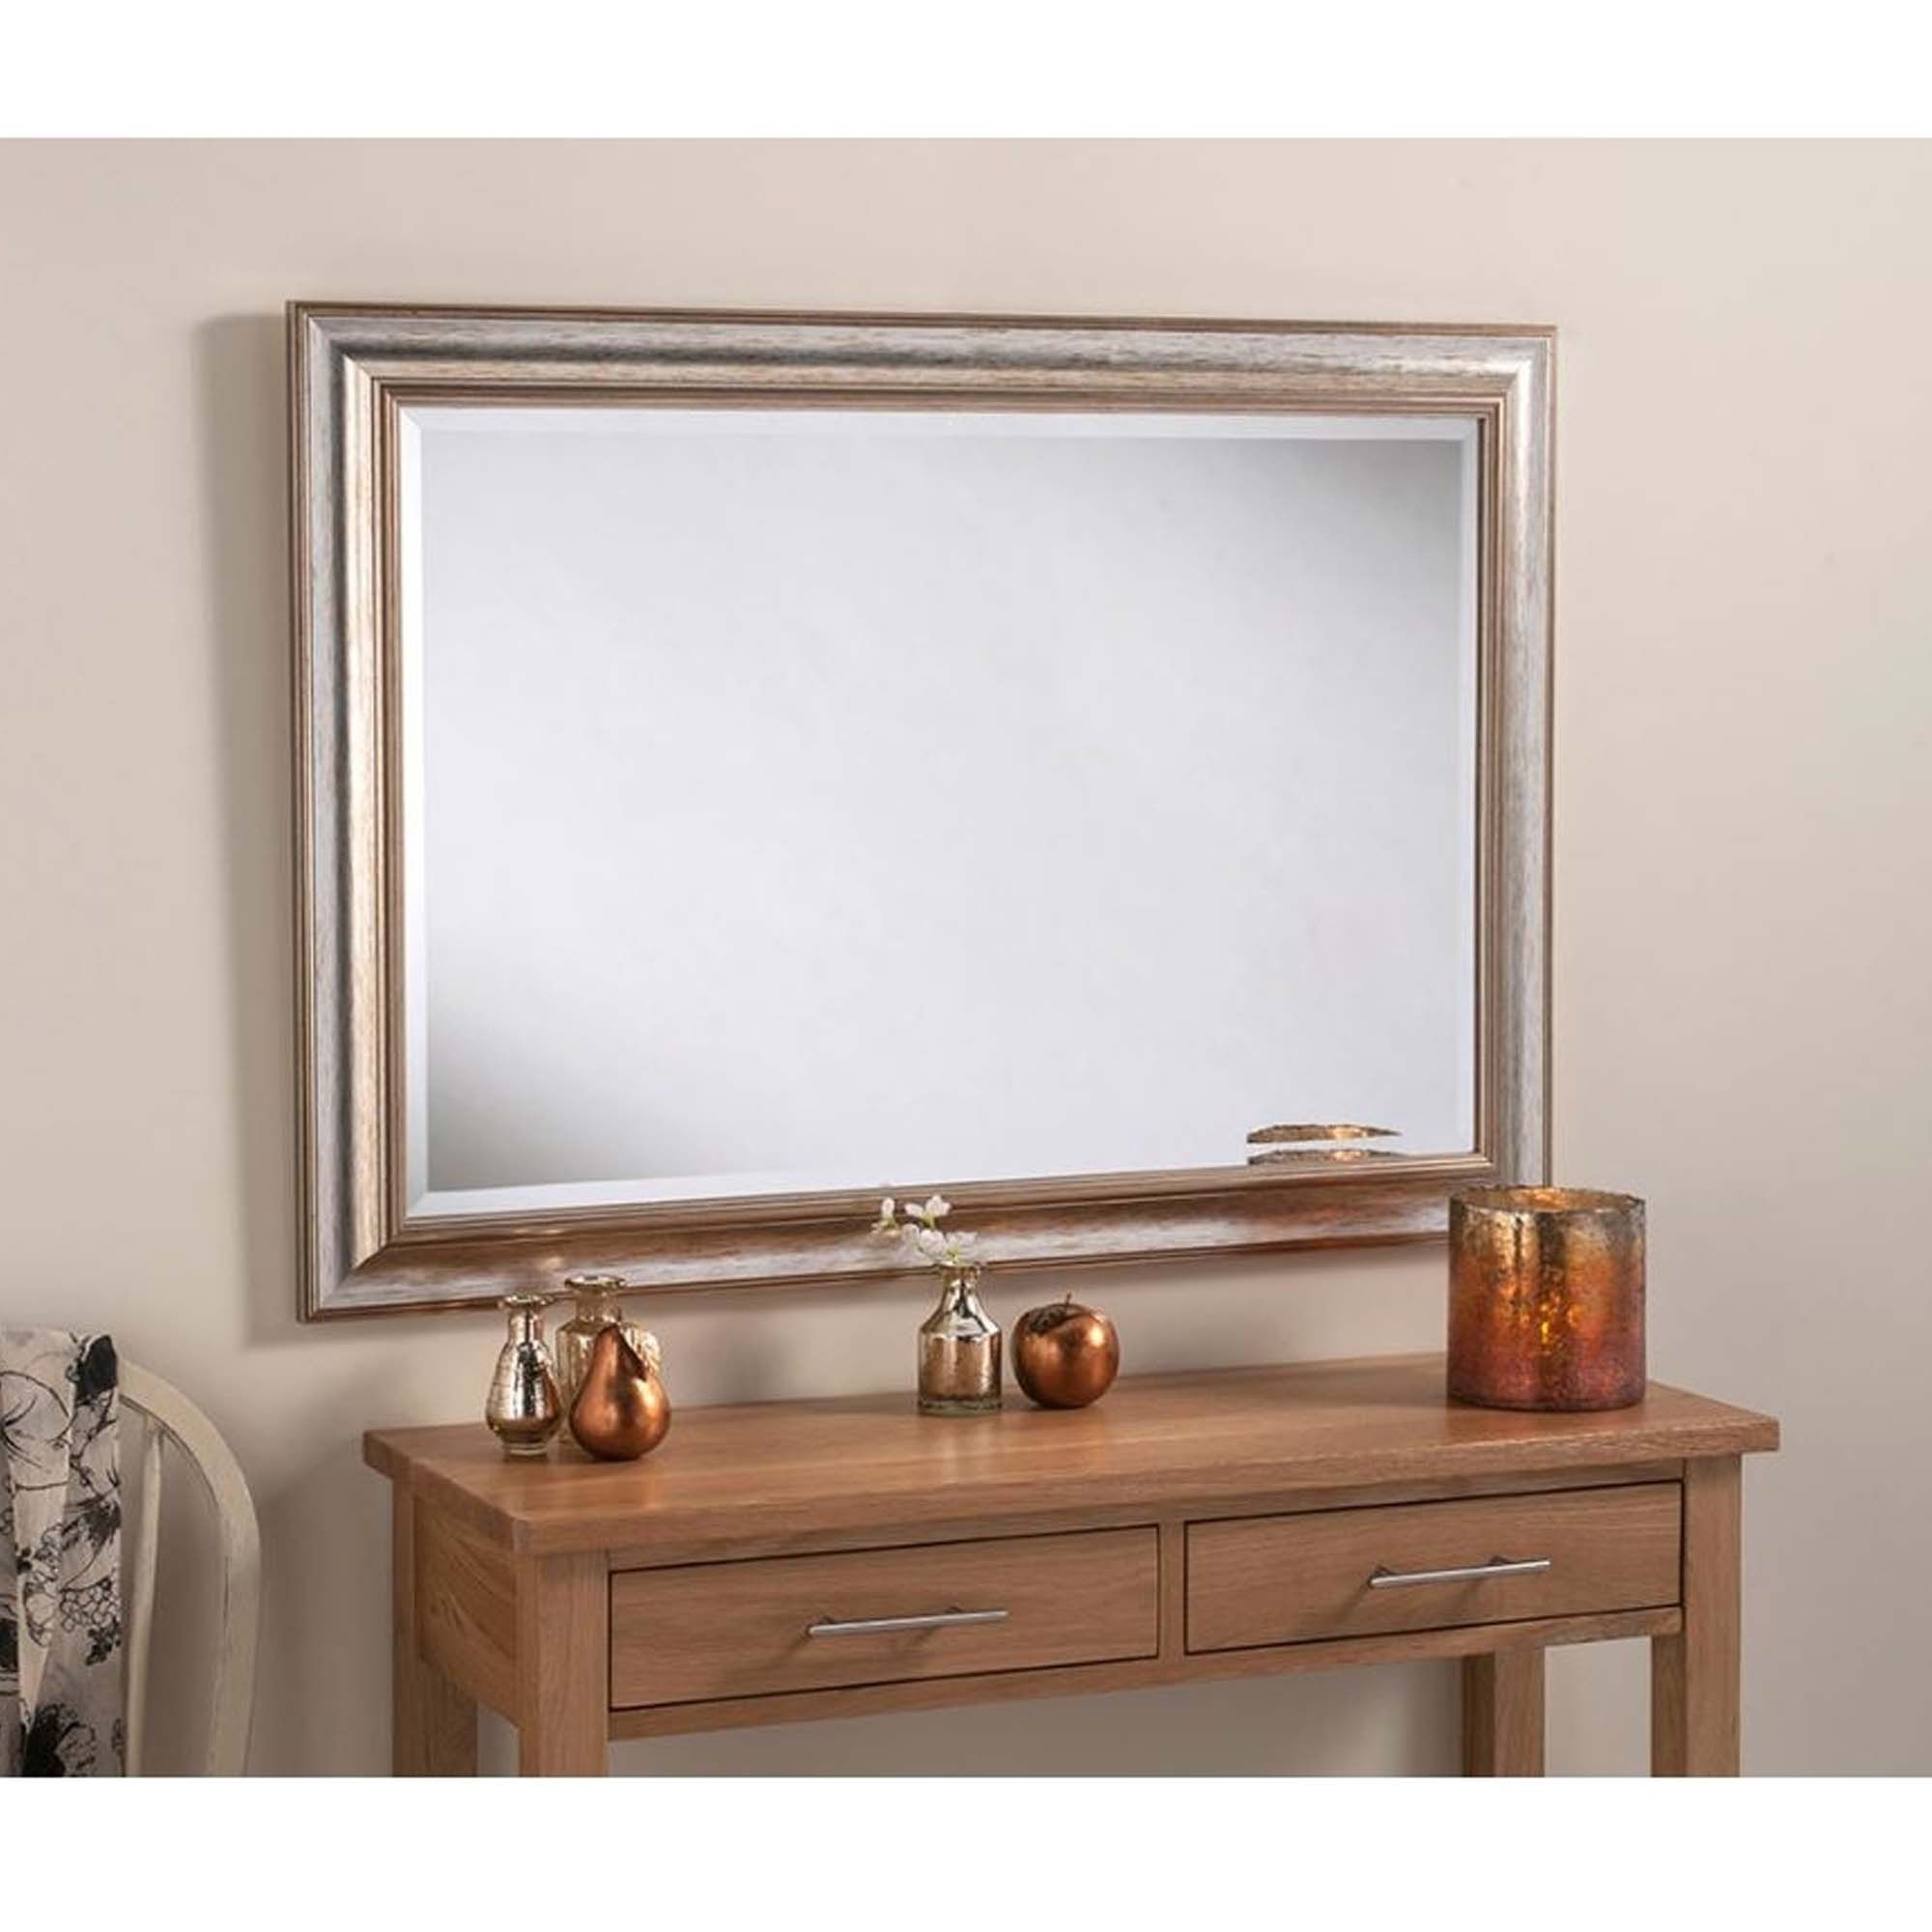 Argenta Silver Rectangular Wall Mirror | Homesdirect365 With Regard To Silver High Wall Mirrors (View 13 of 15)